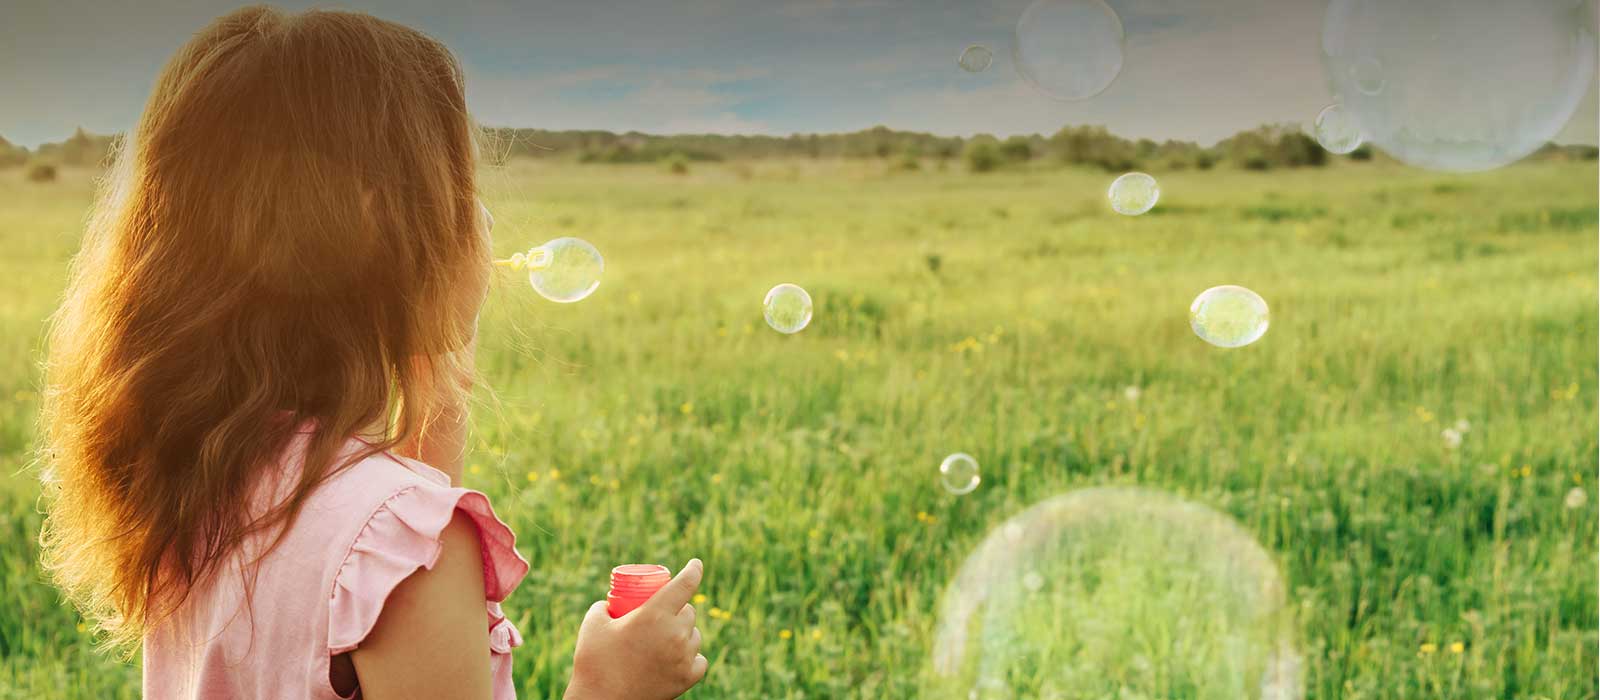 Young girl blowing bubbles in green field